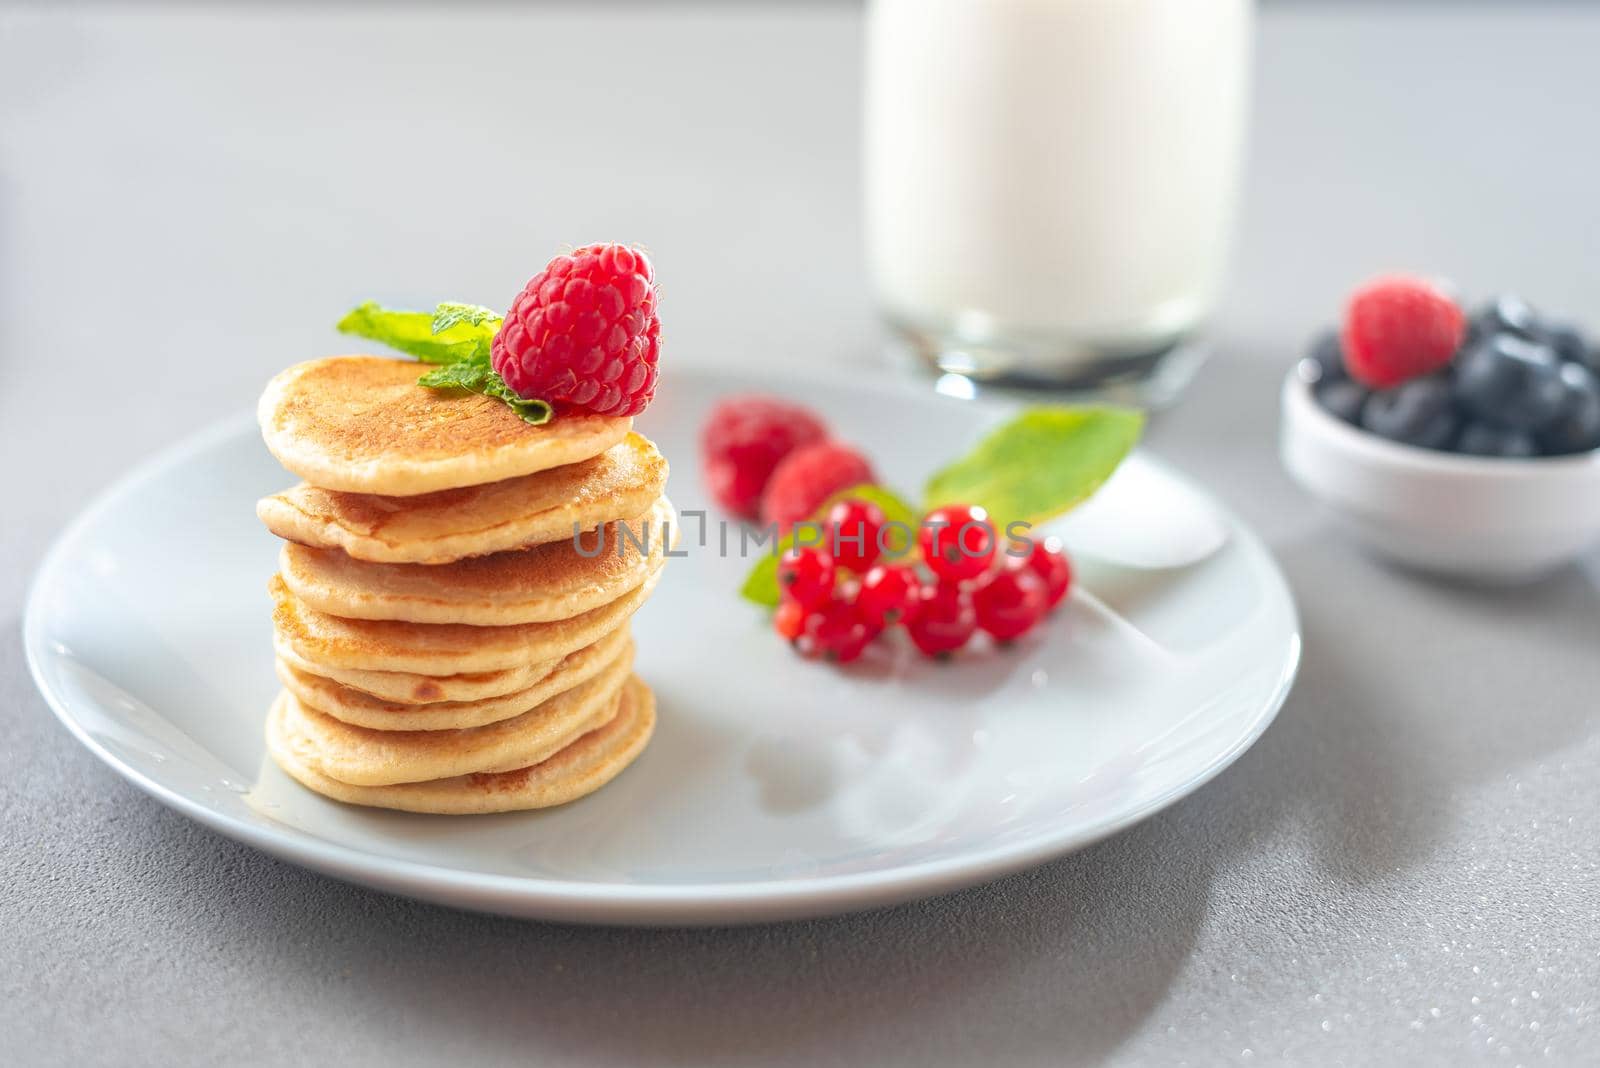 Pancakes with berries on a white plate. American Pancake Mini Pancakes with berries by gulyaevstudio